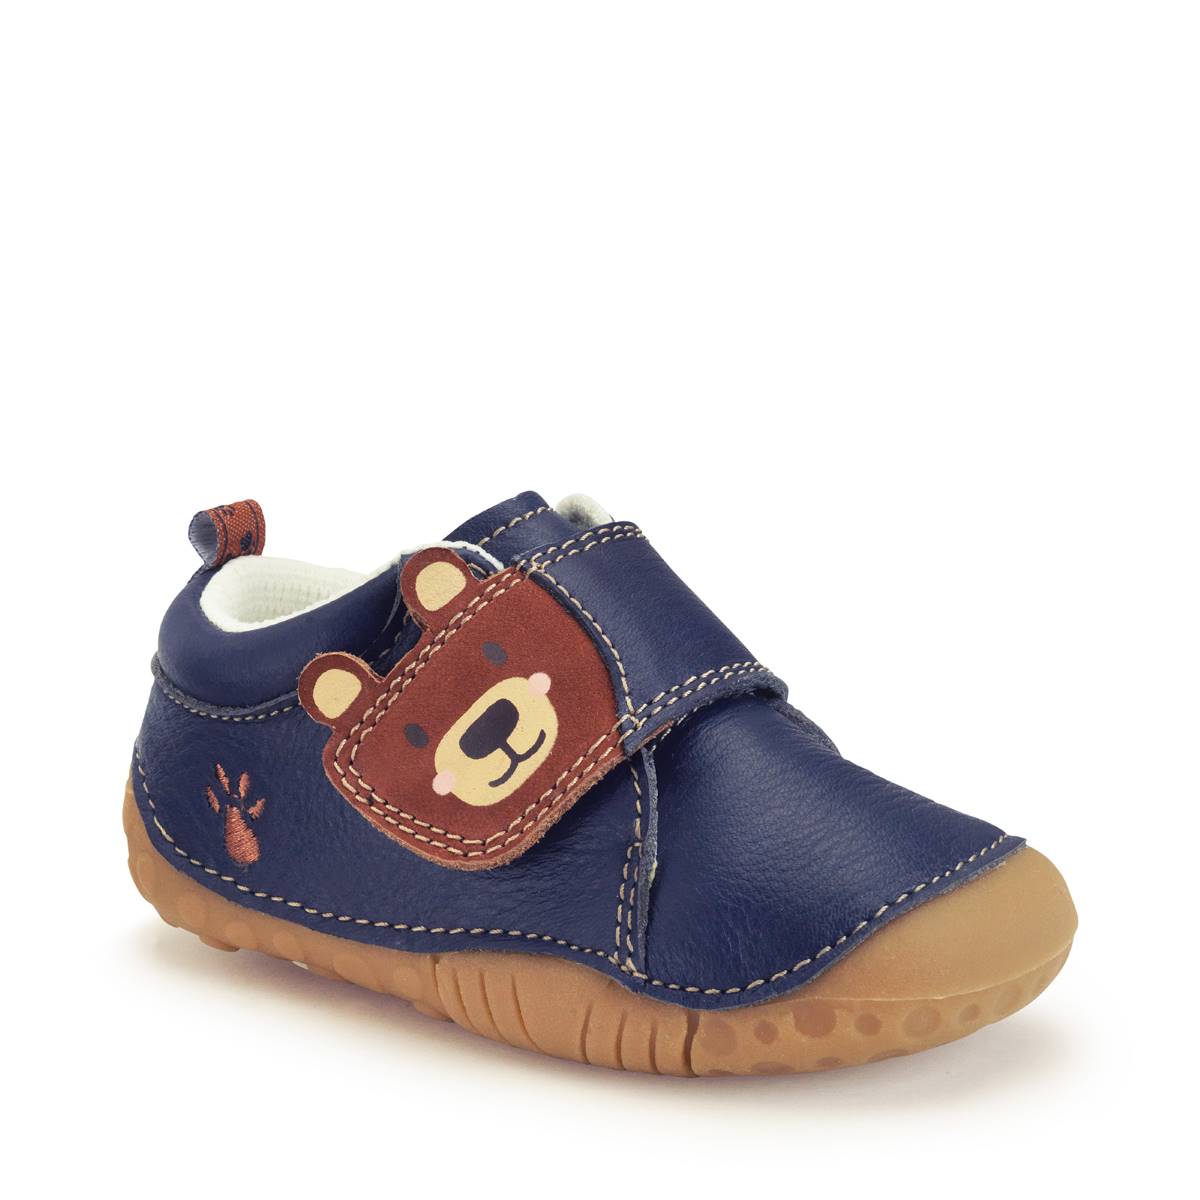 Start Rite Bear Hug 1v BLUE LEATHER Kids Boys First Shoes 0824-97G in a Plain Leather in Size 3